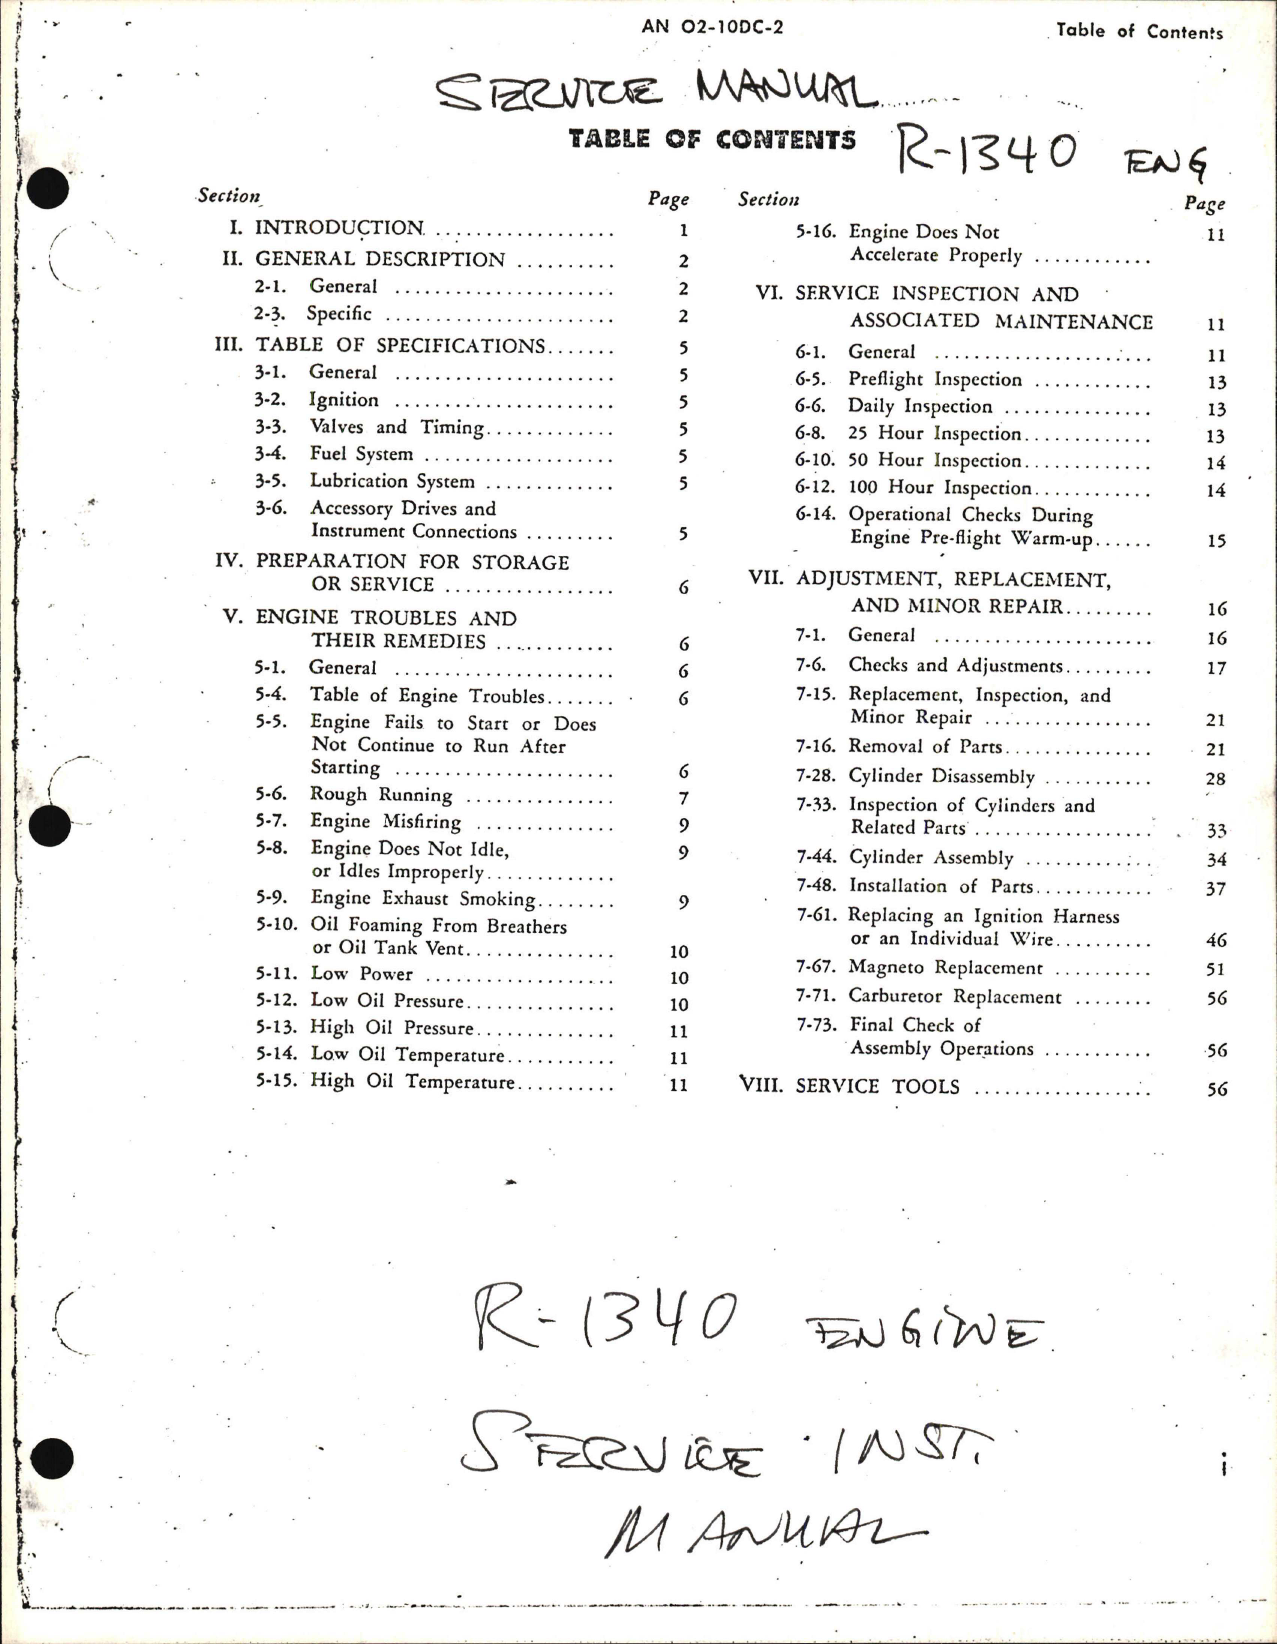 Sample page 1 from AirCorps Library document: Service Instructions for R-1340